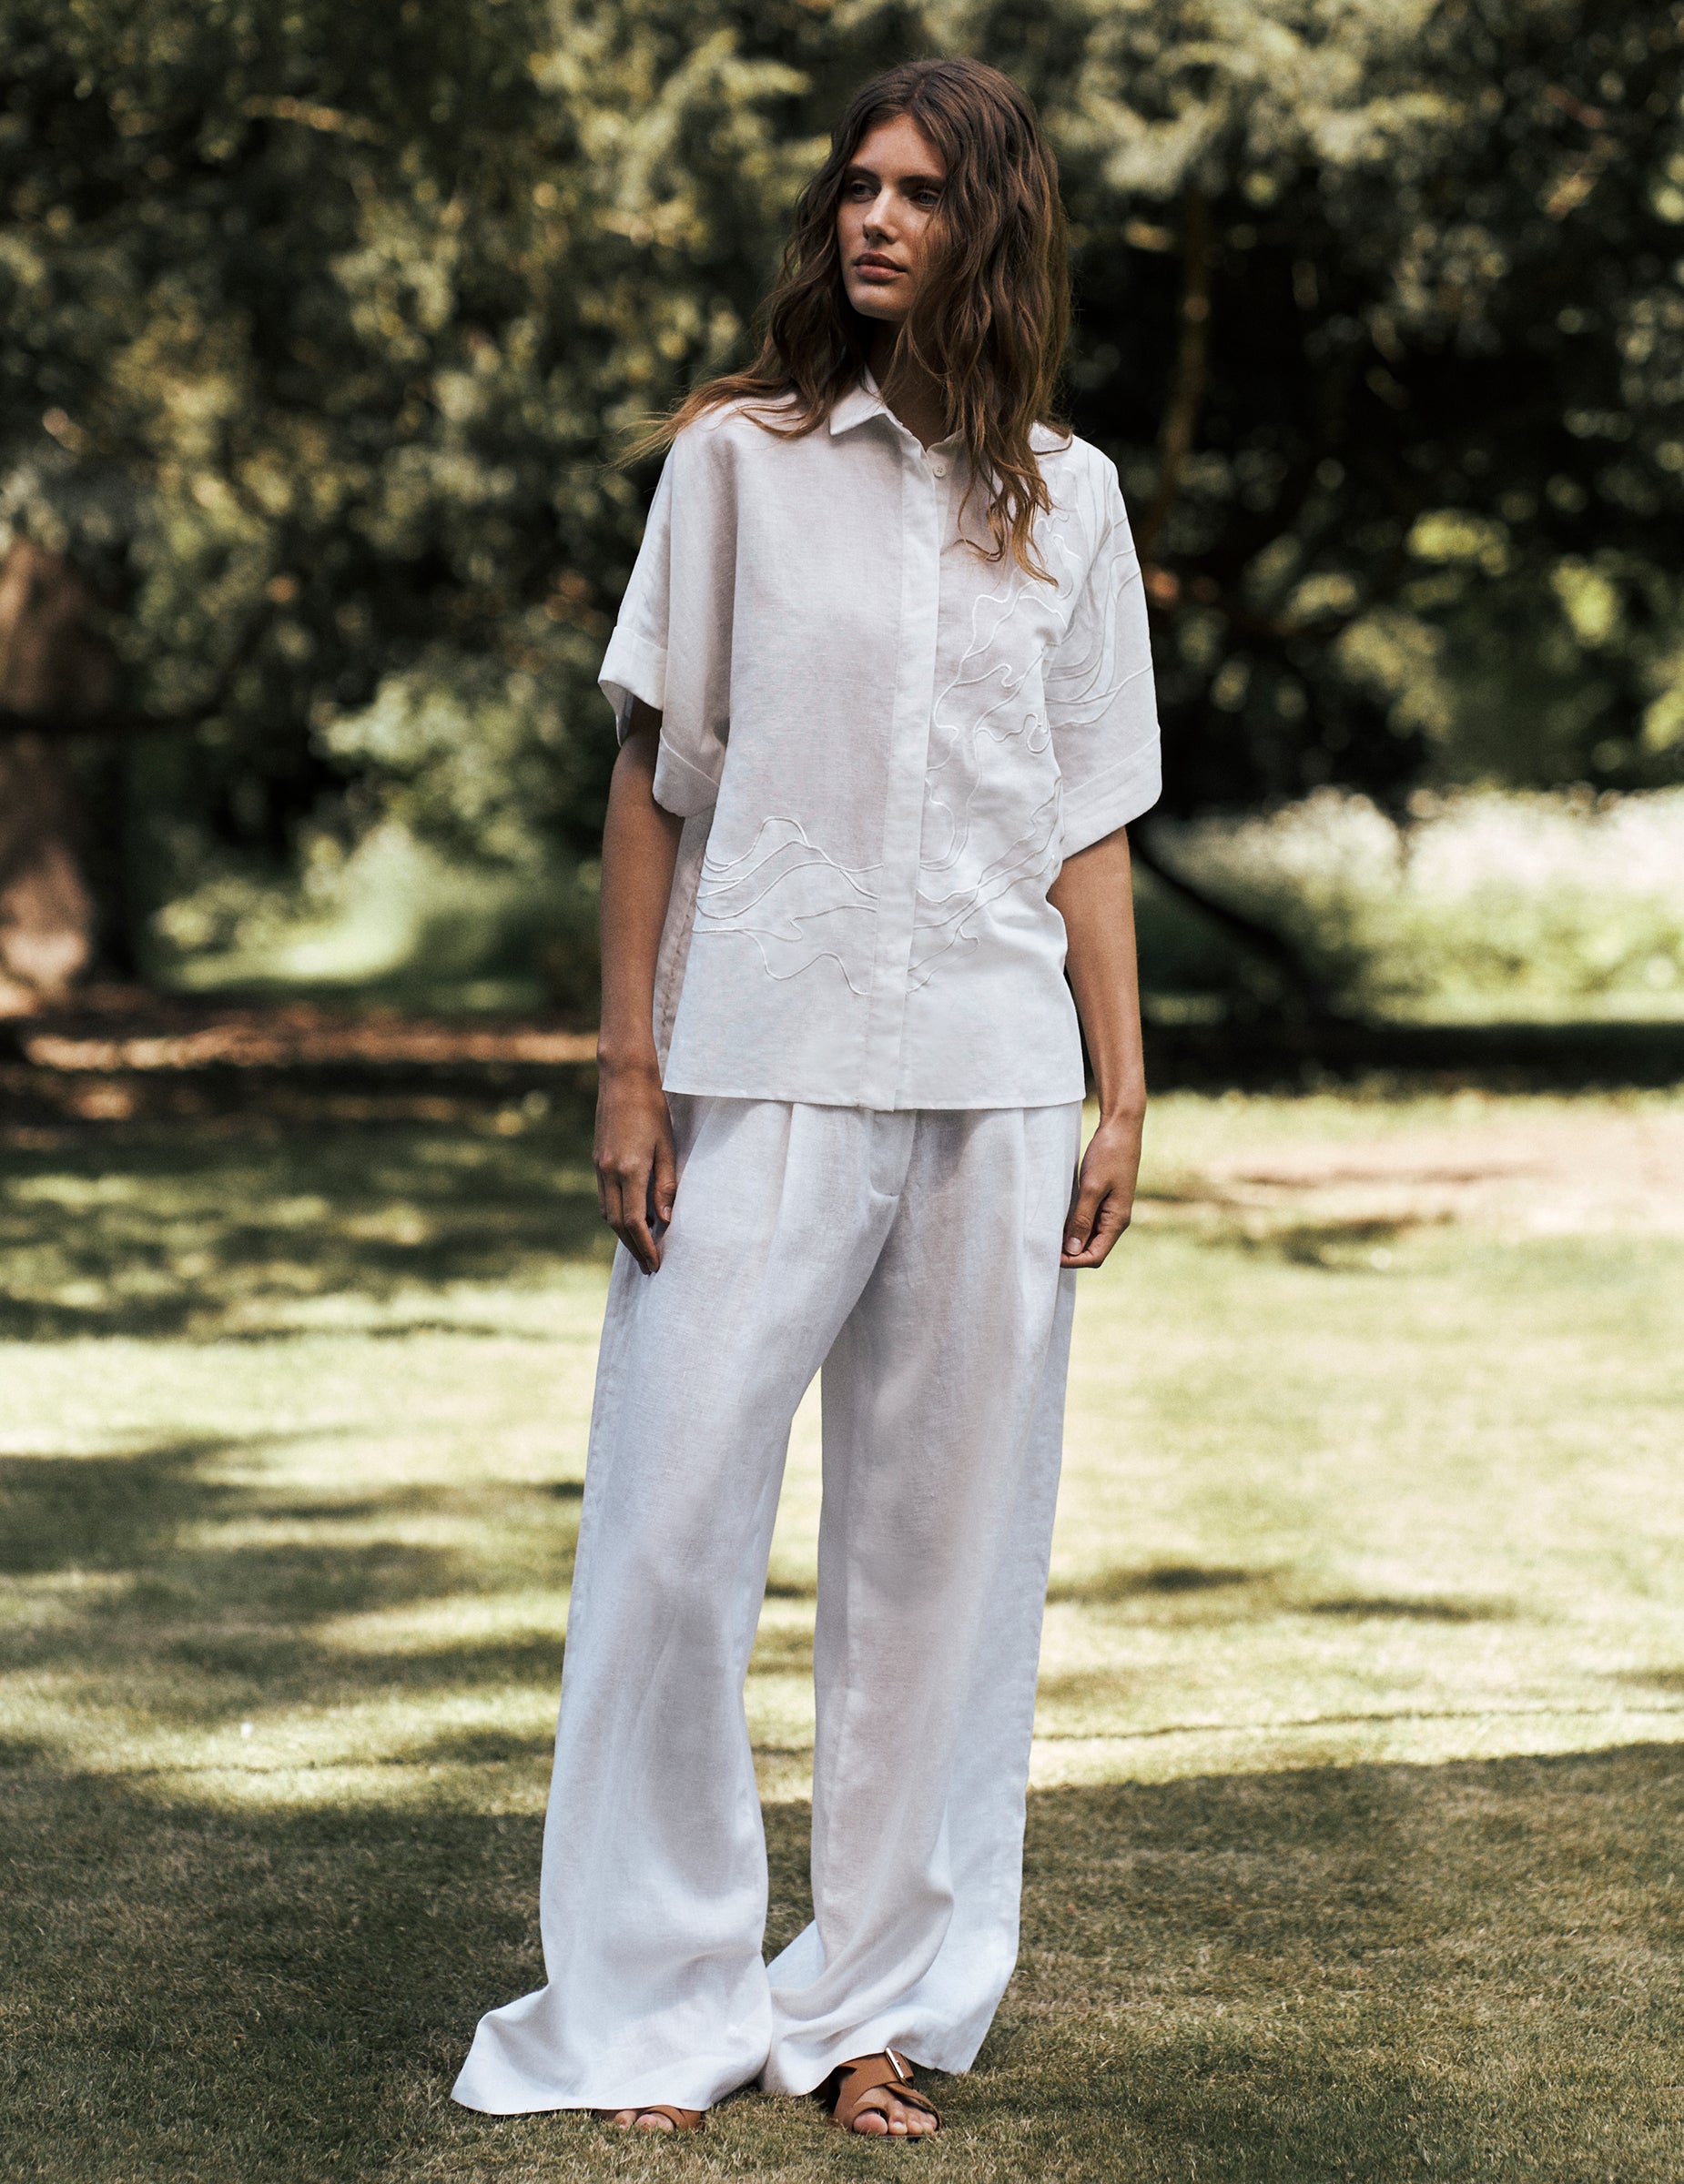 Shop White HighWaisted Linen Pants, Ethically Made by ROVE